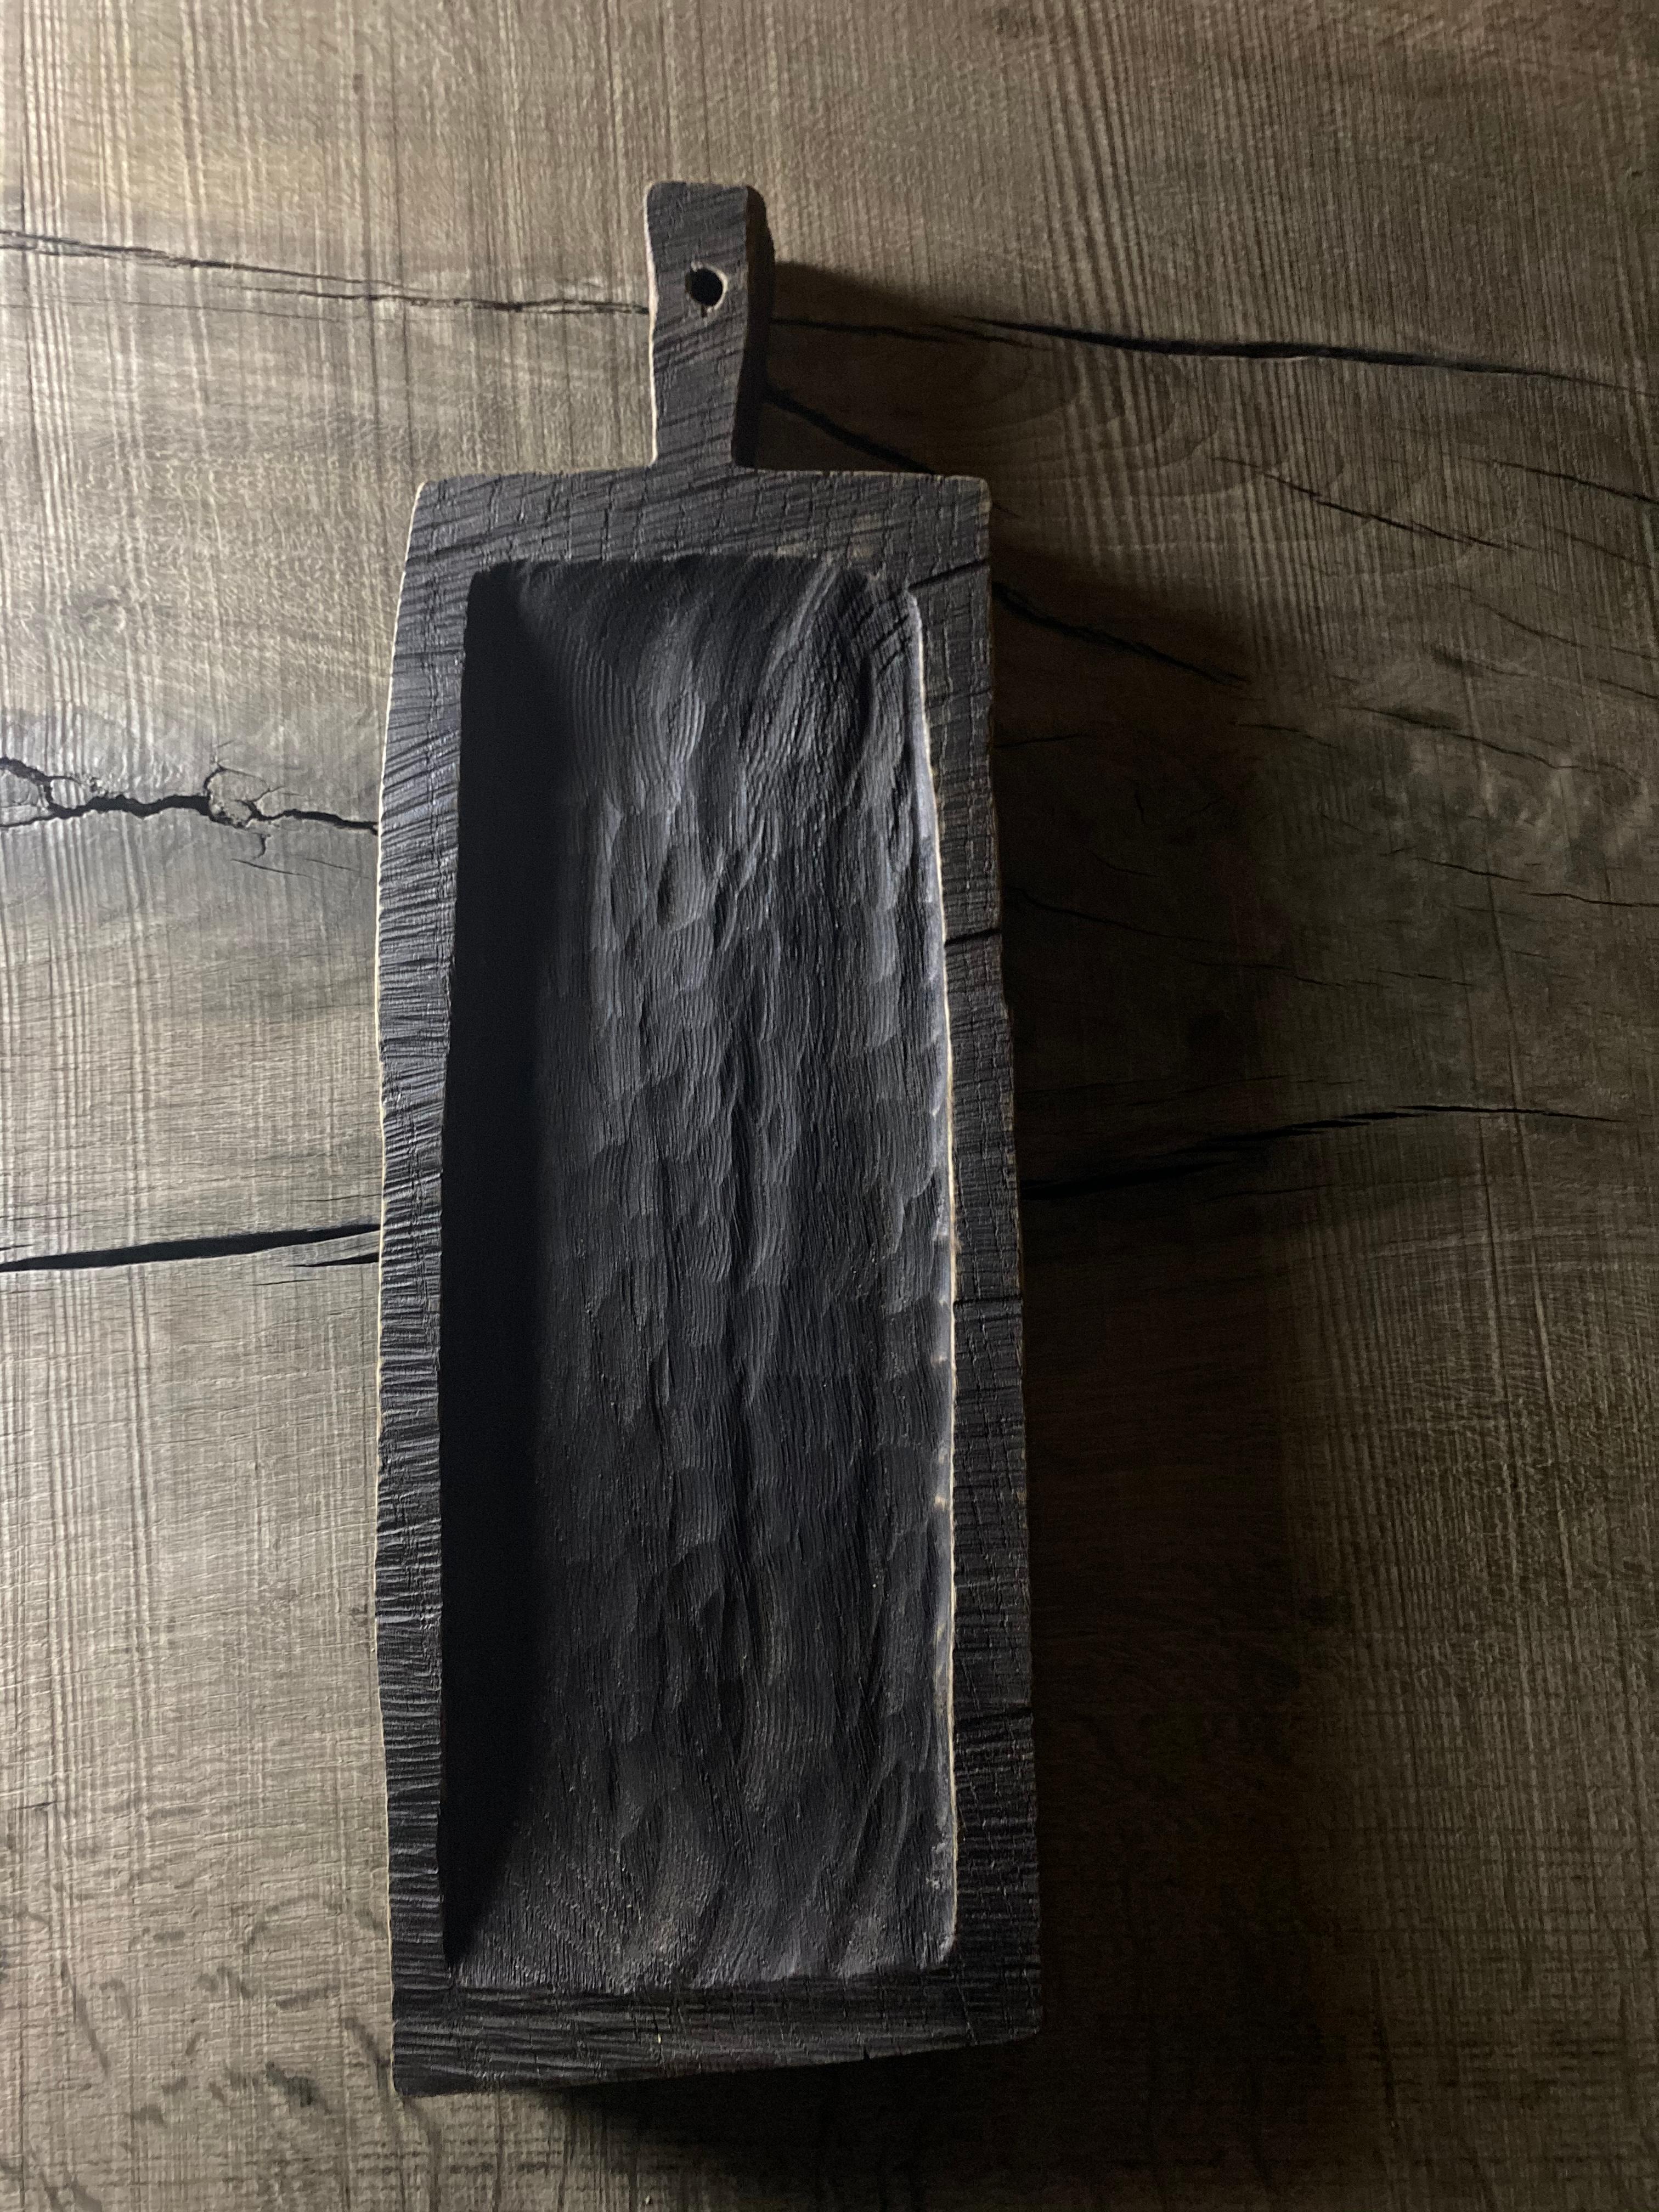 Decorative cutting board #4
Sculpted solid oak

Approximative size: from 20cm to 30cm (form 8'' to 12'')
Custom size available

SÓHA design studio conceives and produces furniture design and decorative objects in solid oak in an authentic style.